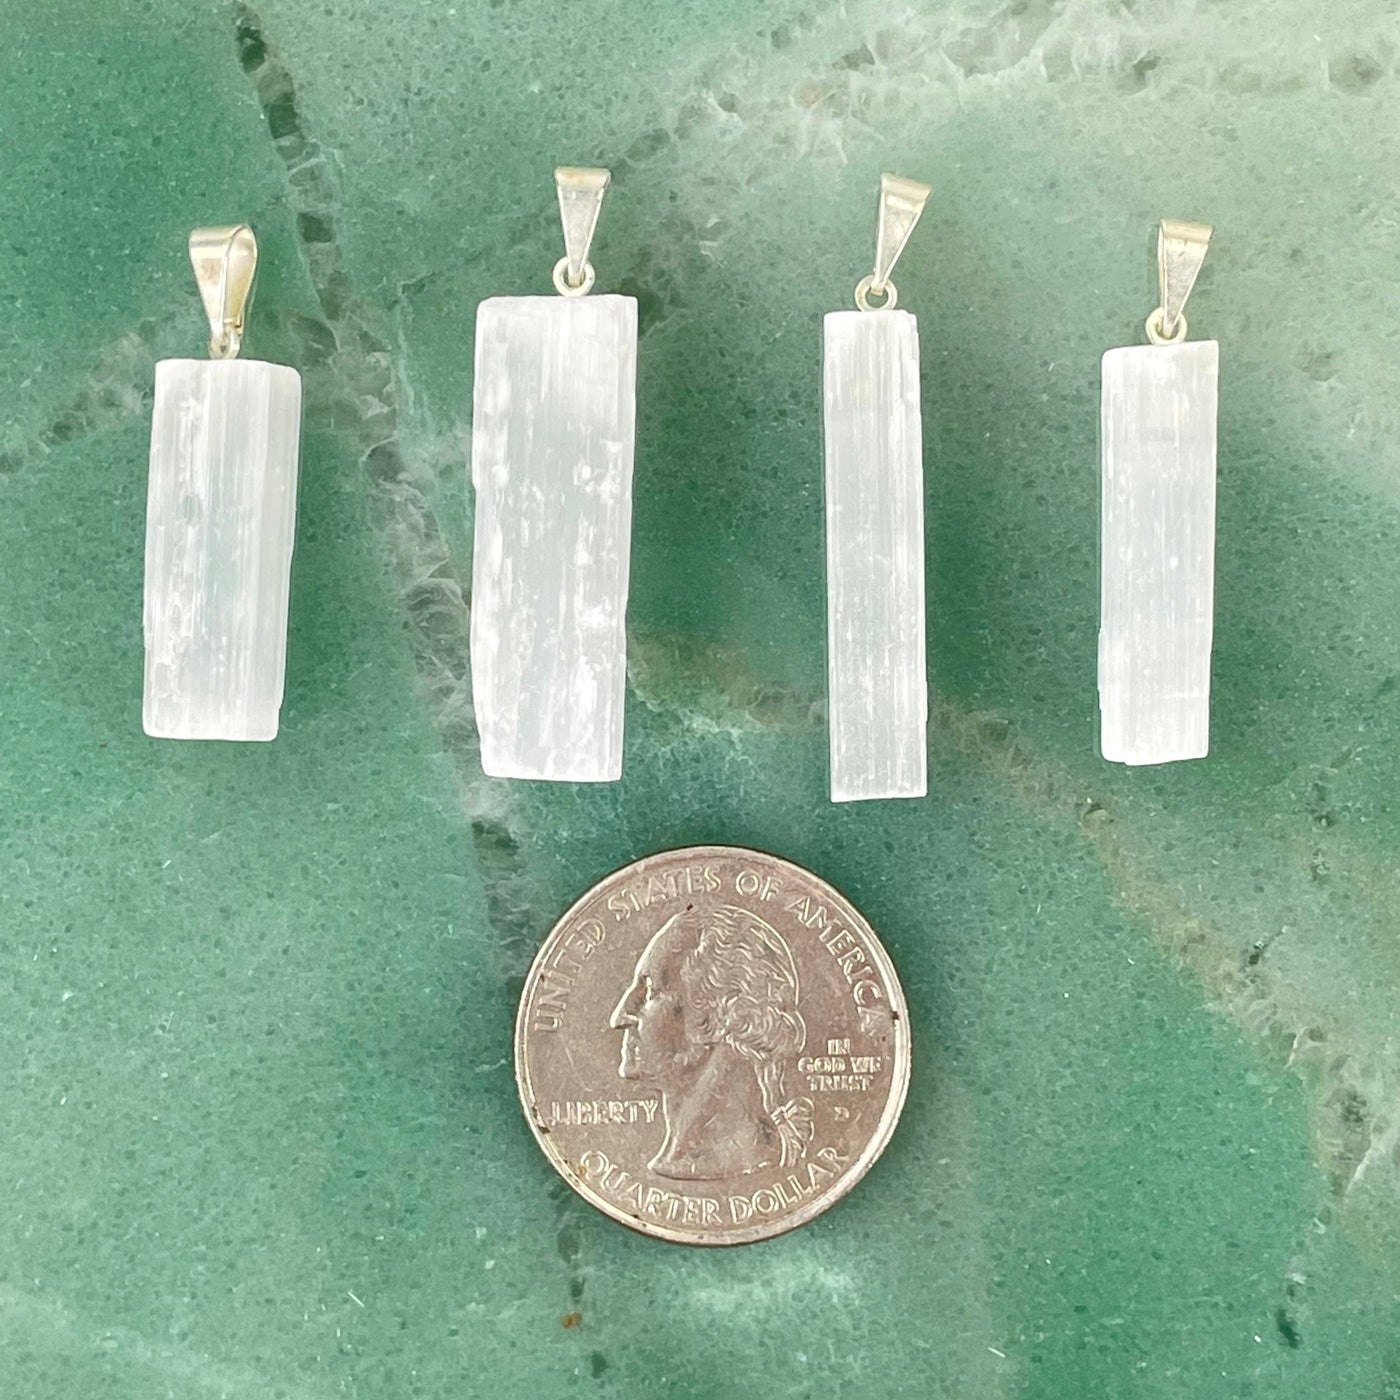 four selenite rough pendants with quarter for size reference